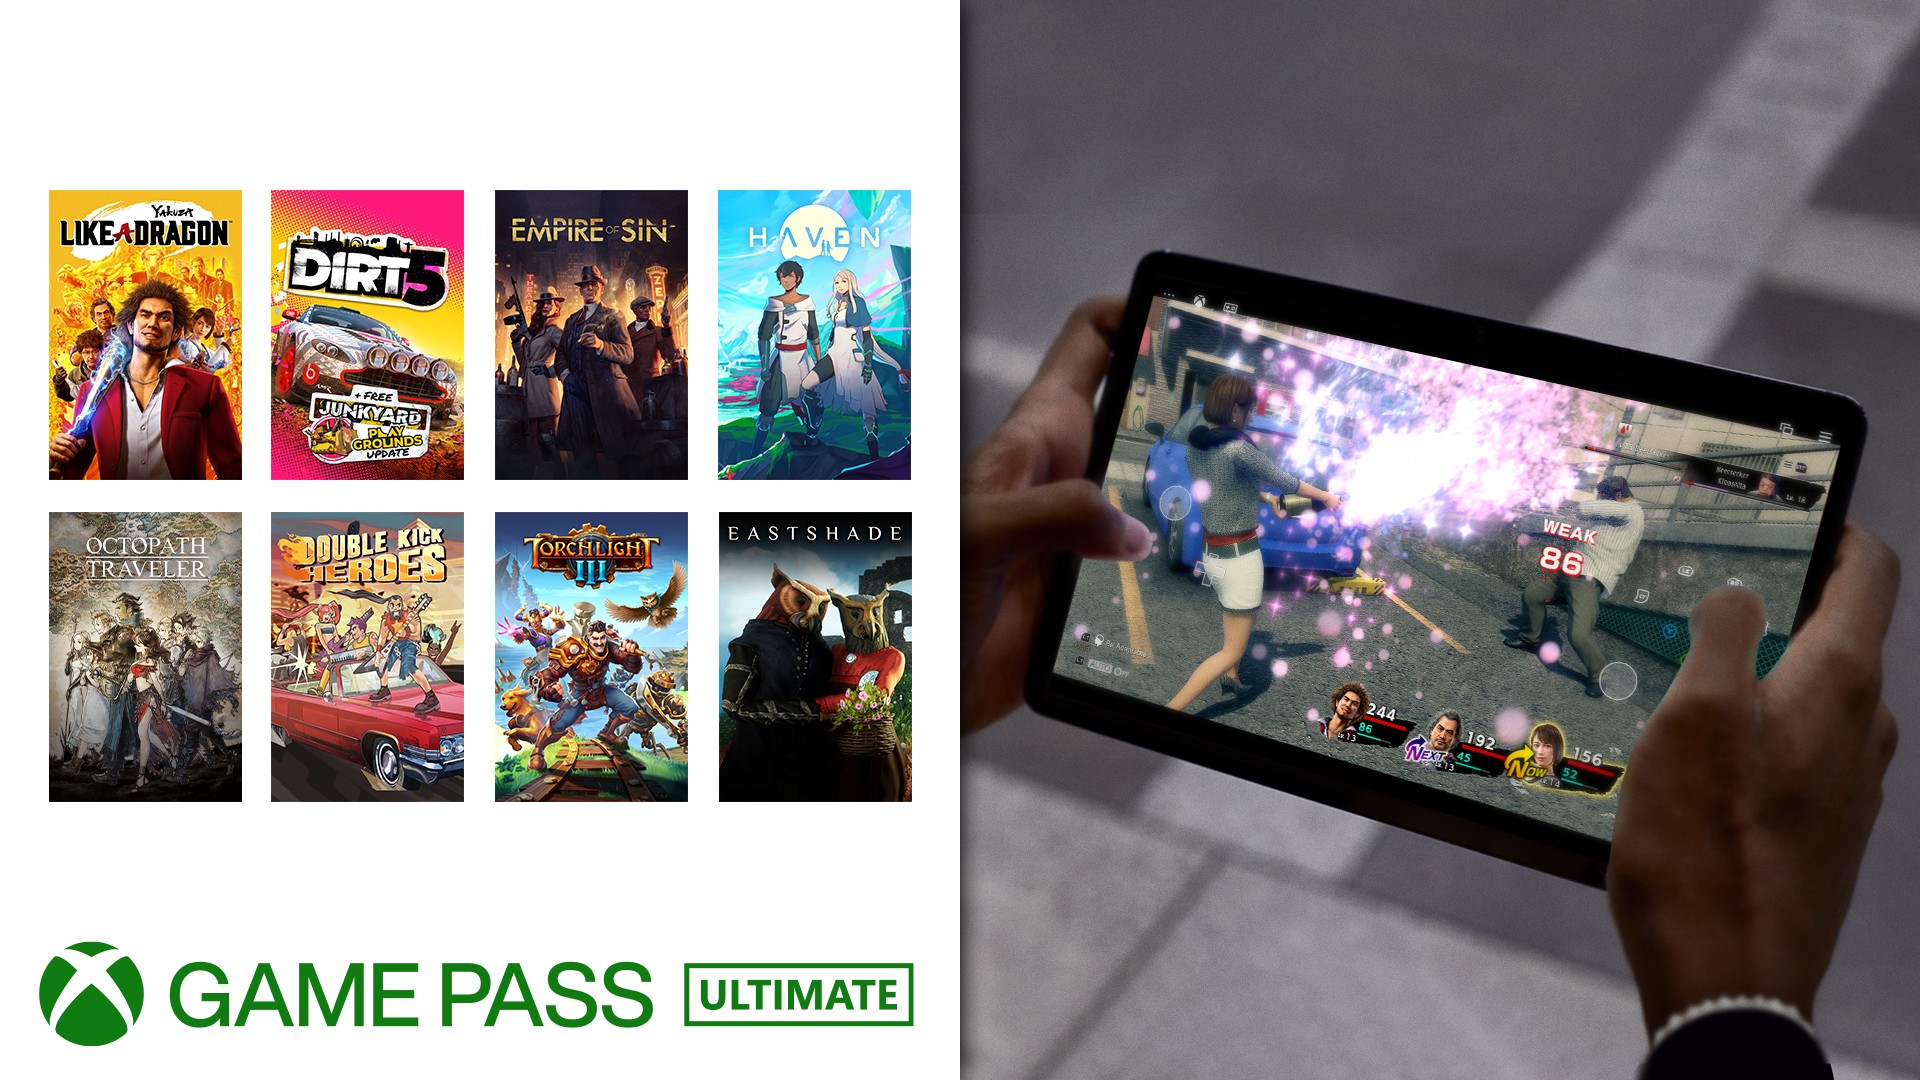 More Cloud-Enabled Games with Xbox Touch Controls